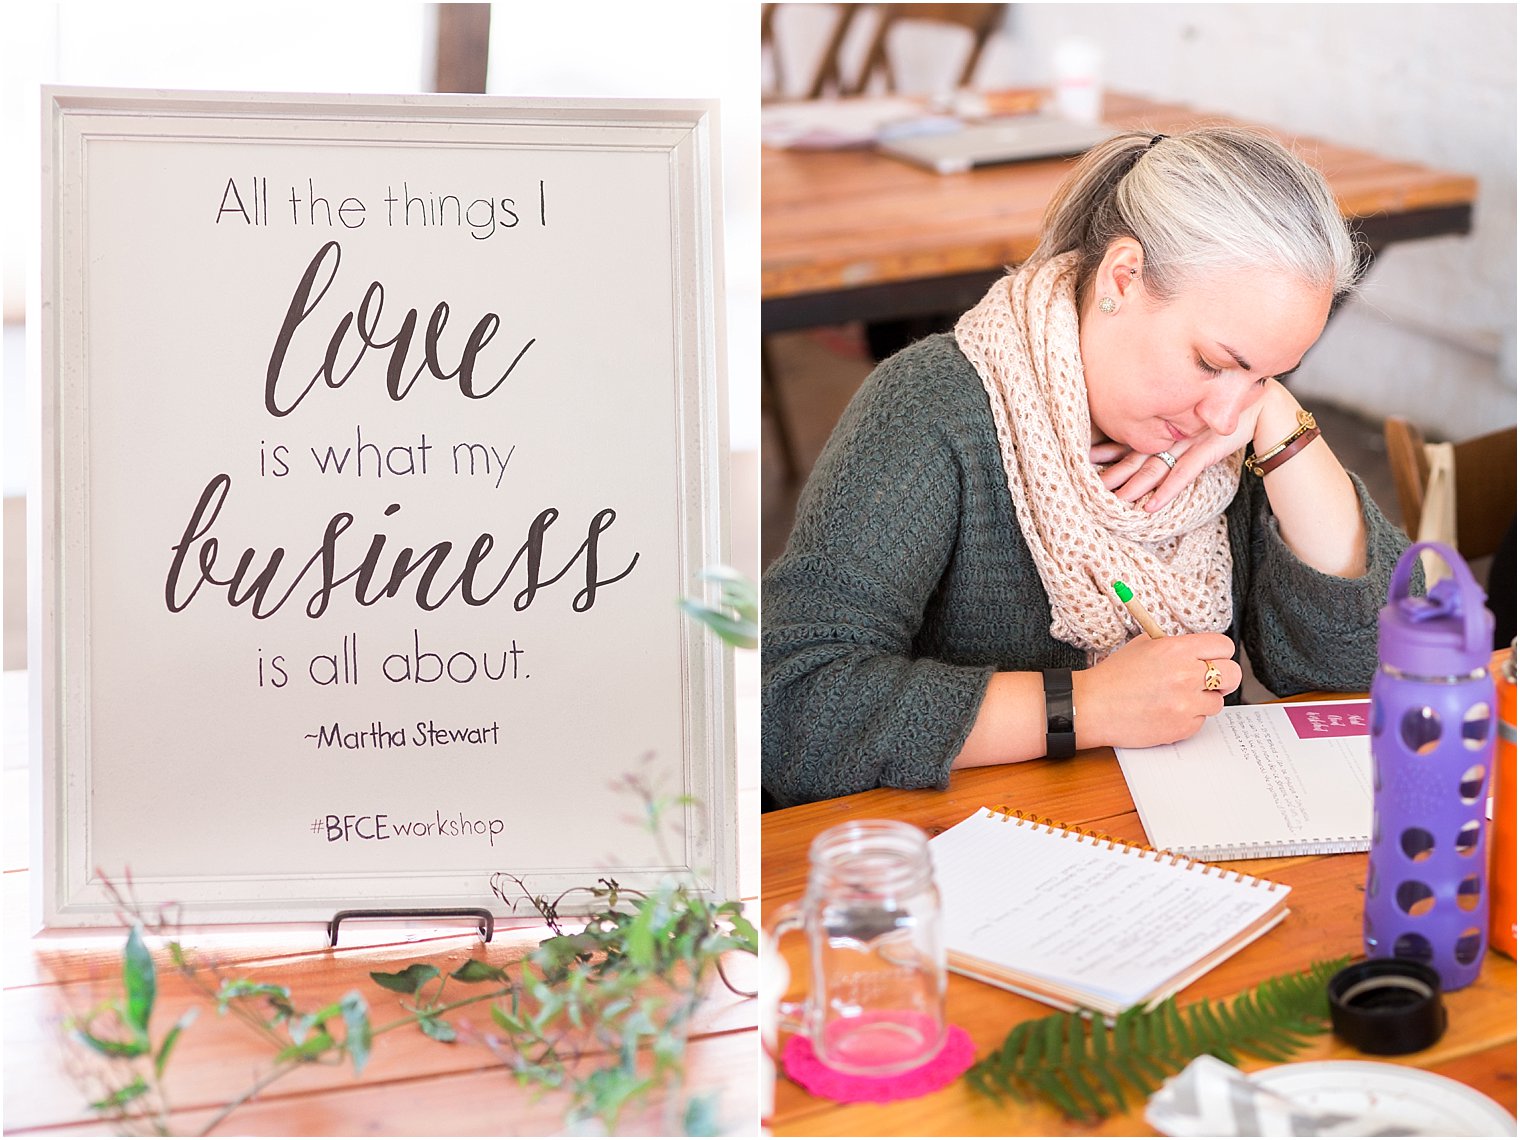 "All the things I love is what my business is all about."